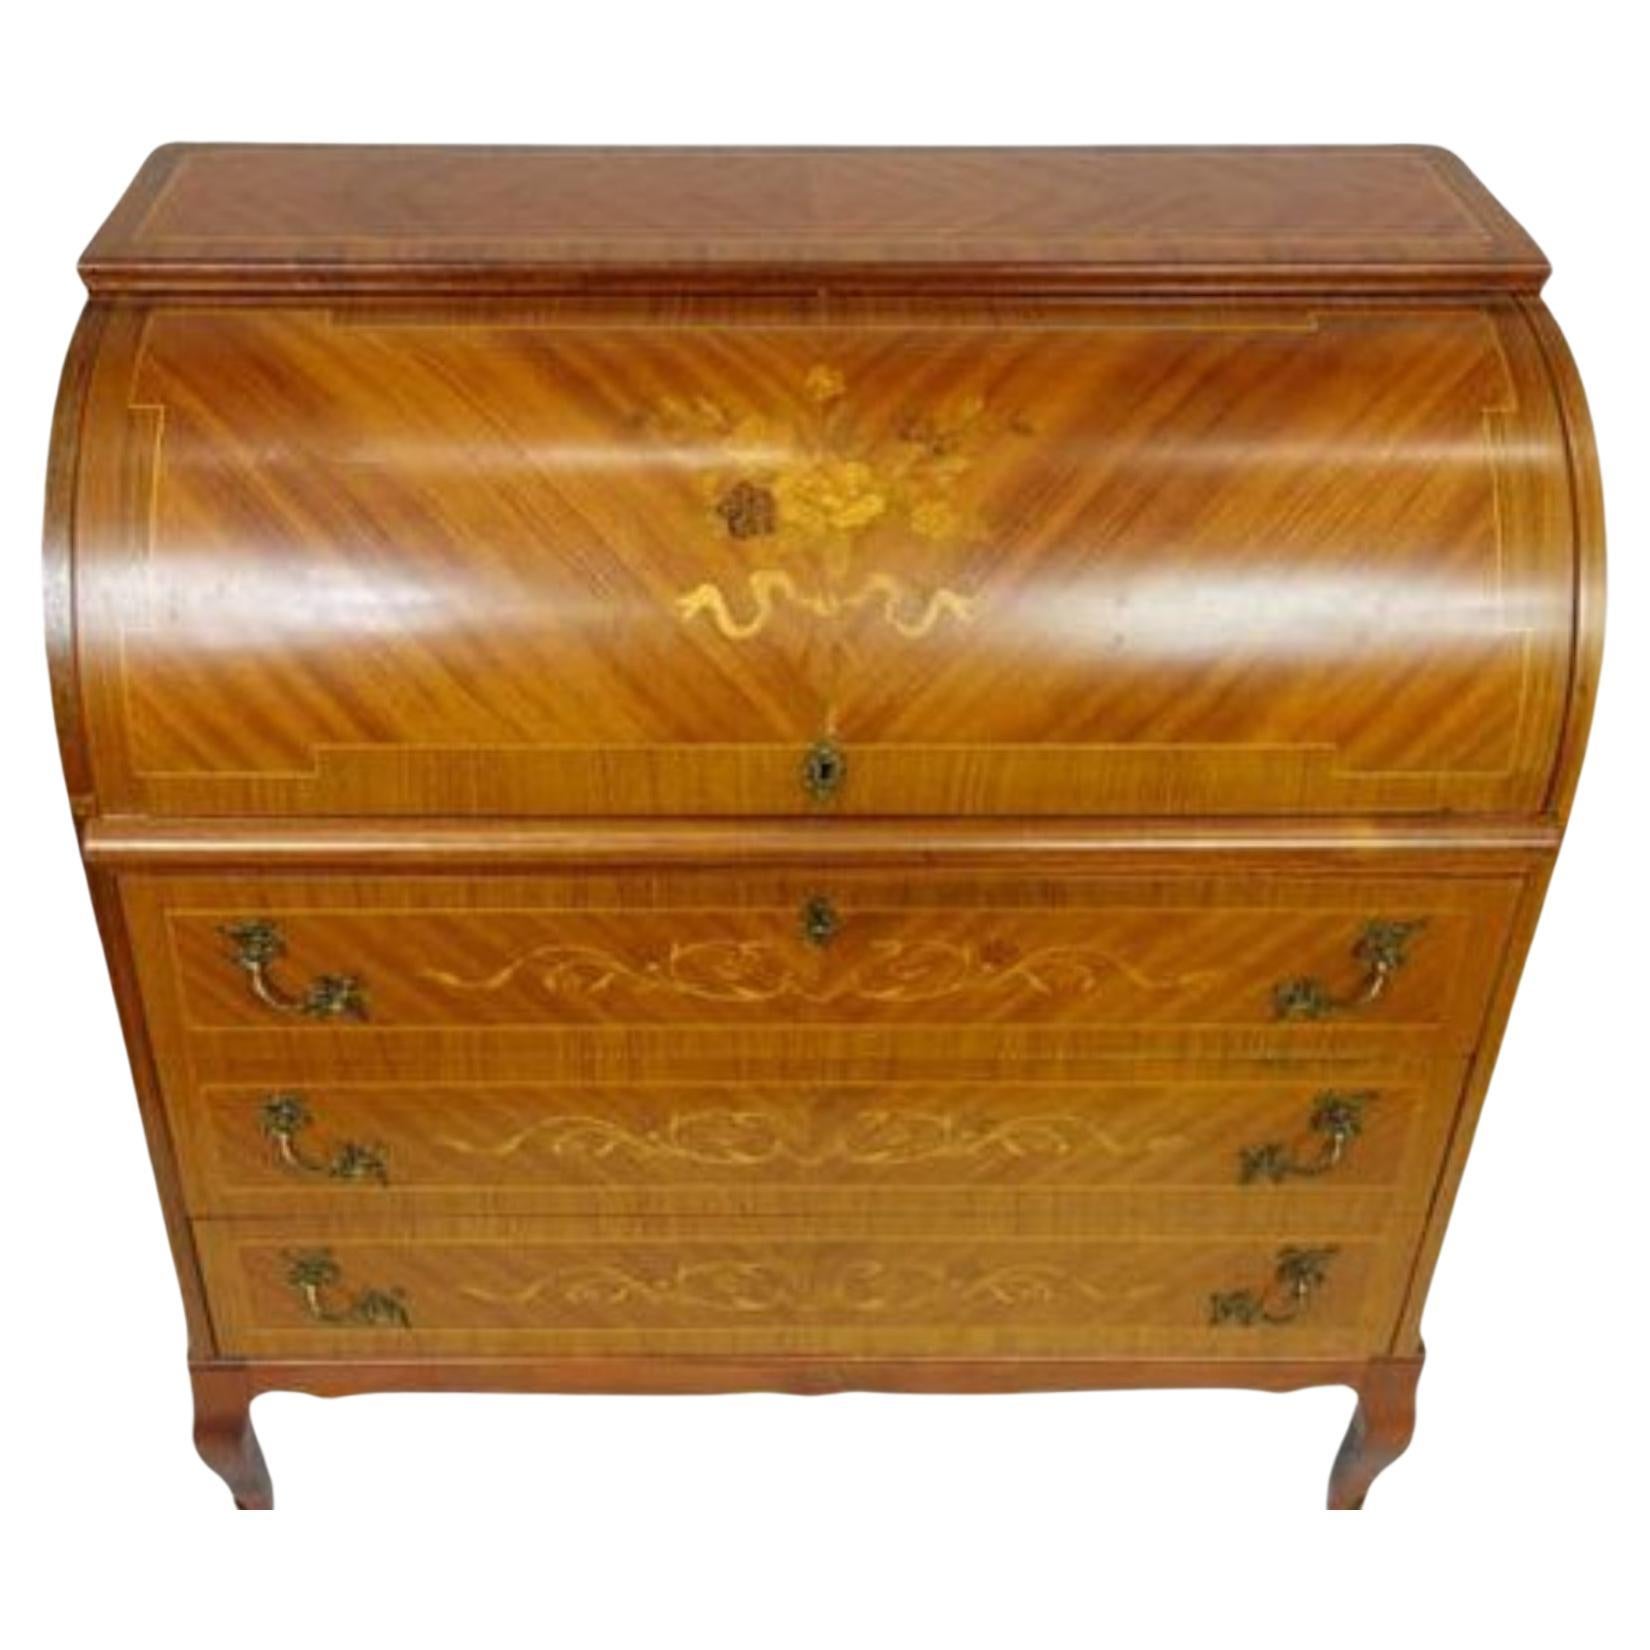 Beautiful Top Down Italian Wood Desk With Inlay For Sale